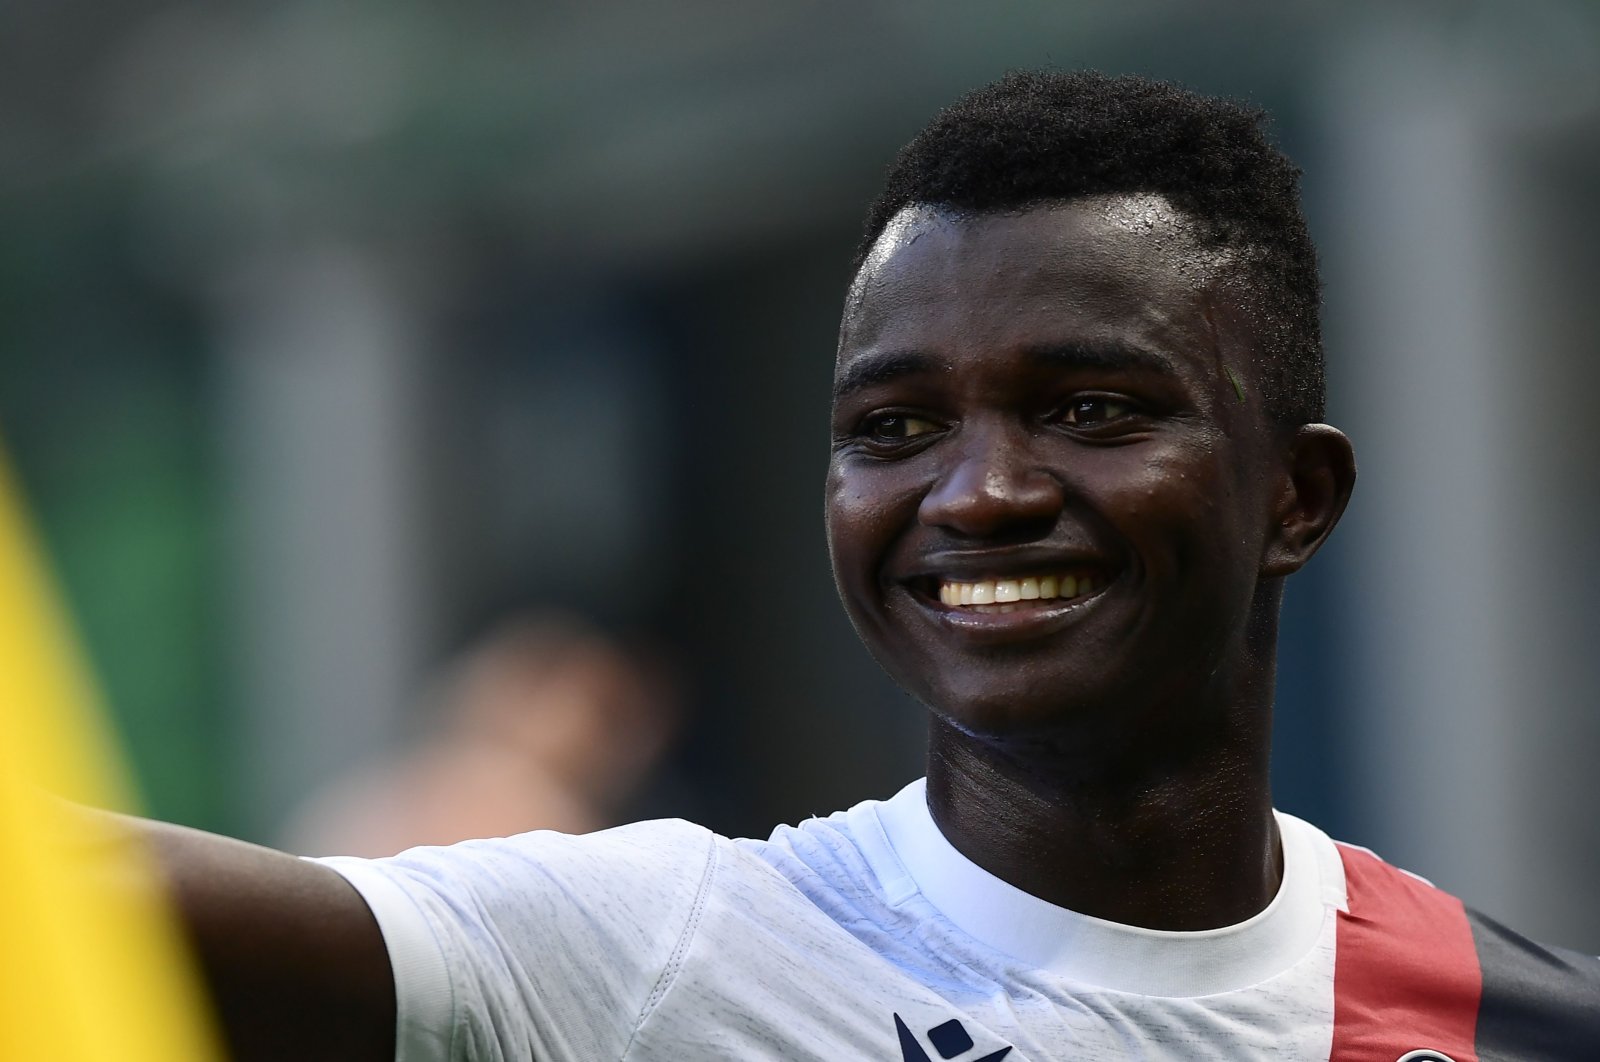 Bologna's Musa Juwara smiles after his team's win against Serie A giants Inter Milan in Milan, Italy, July 5, 2020. (AFP Photo)